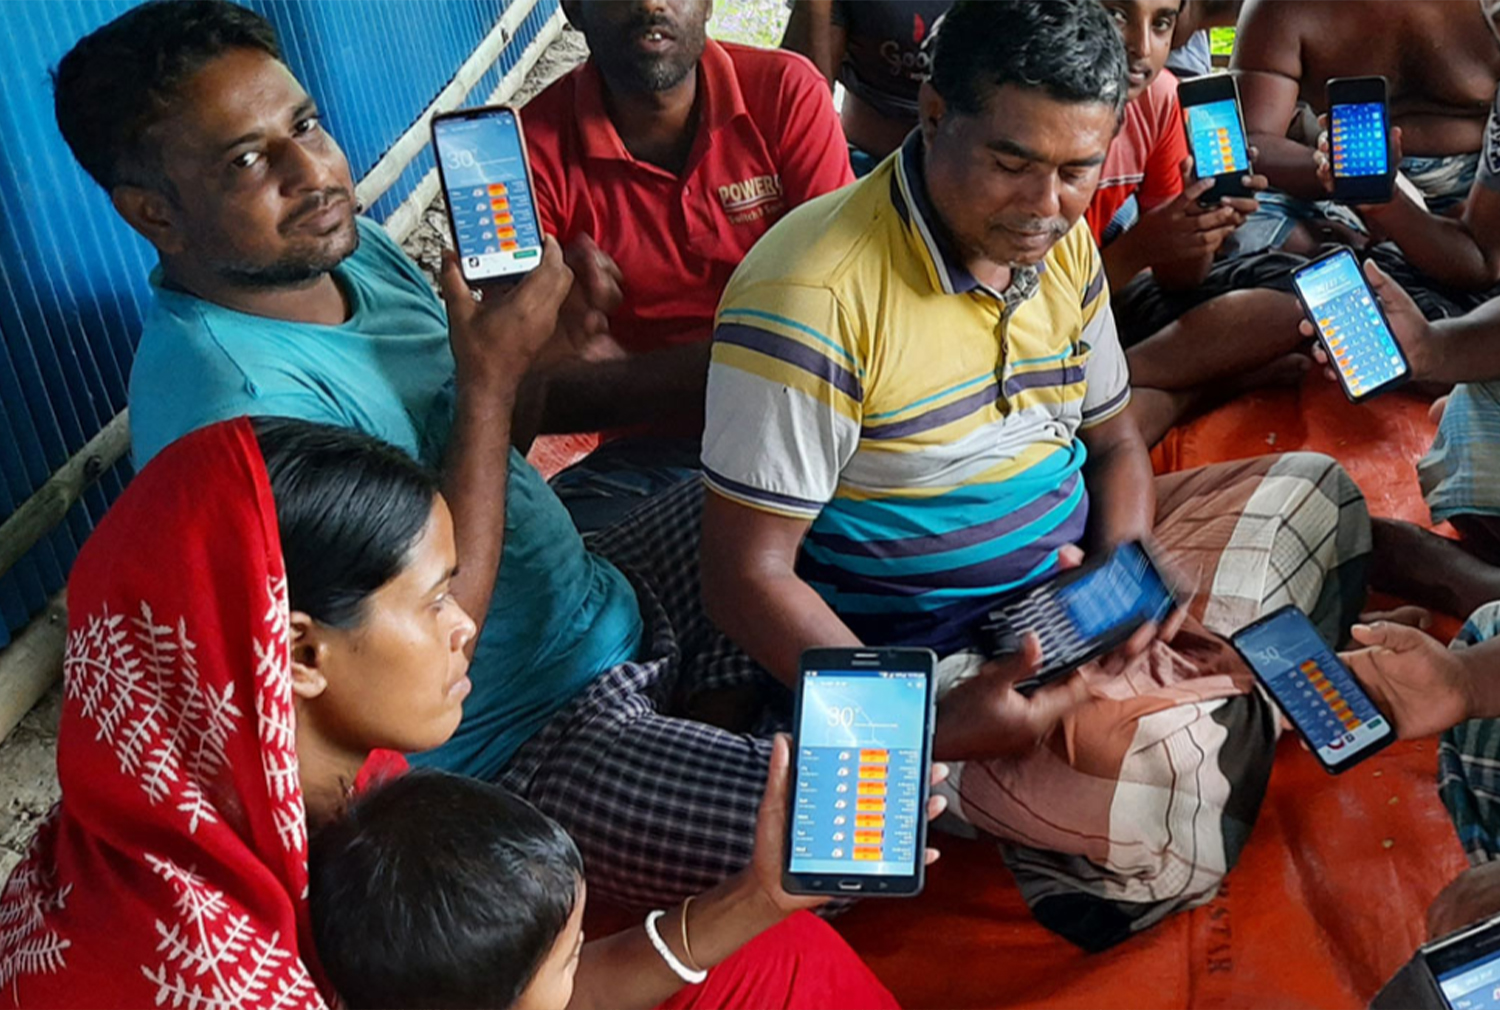 The Waterapps project was developed in collaboration with farmers from Bangladesh, among others. Photo: Uthpal Kumar